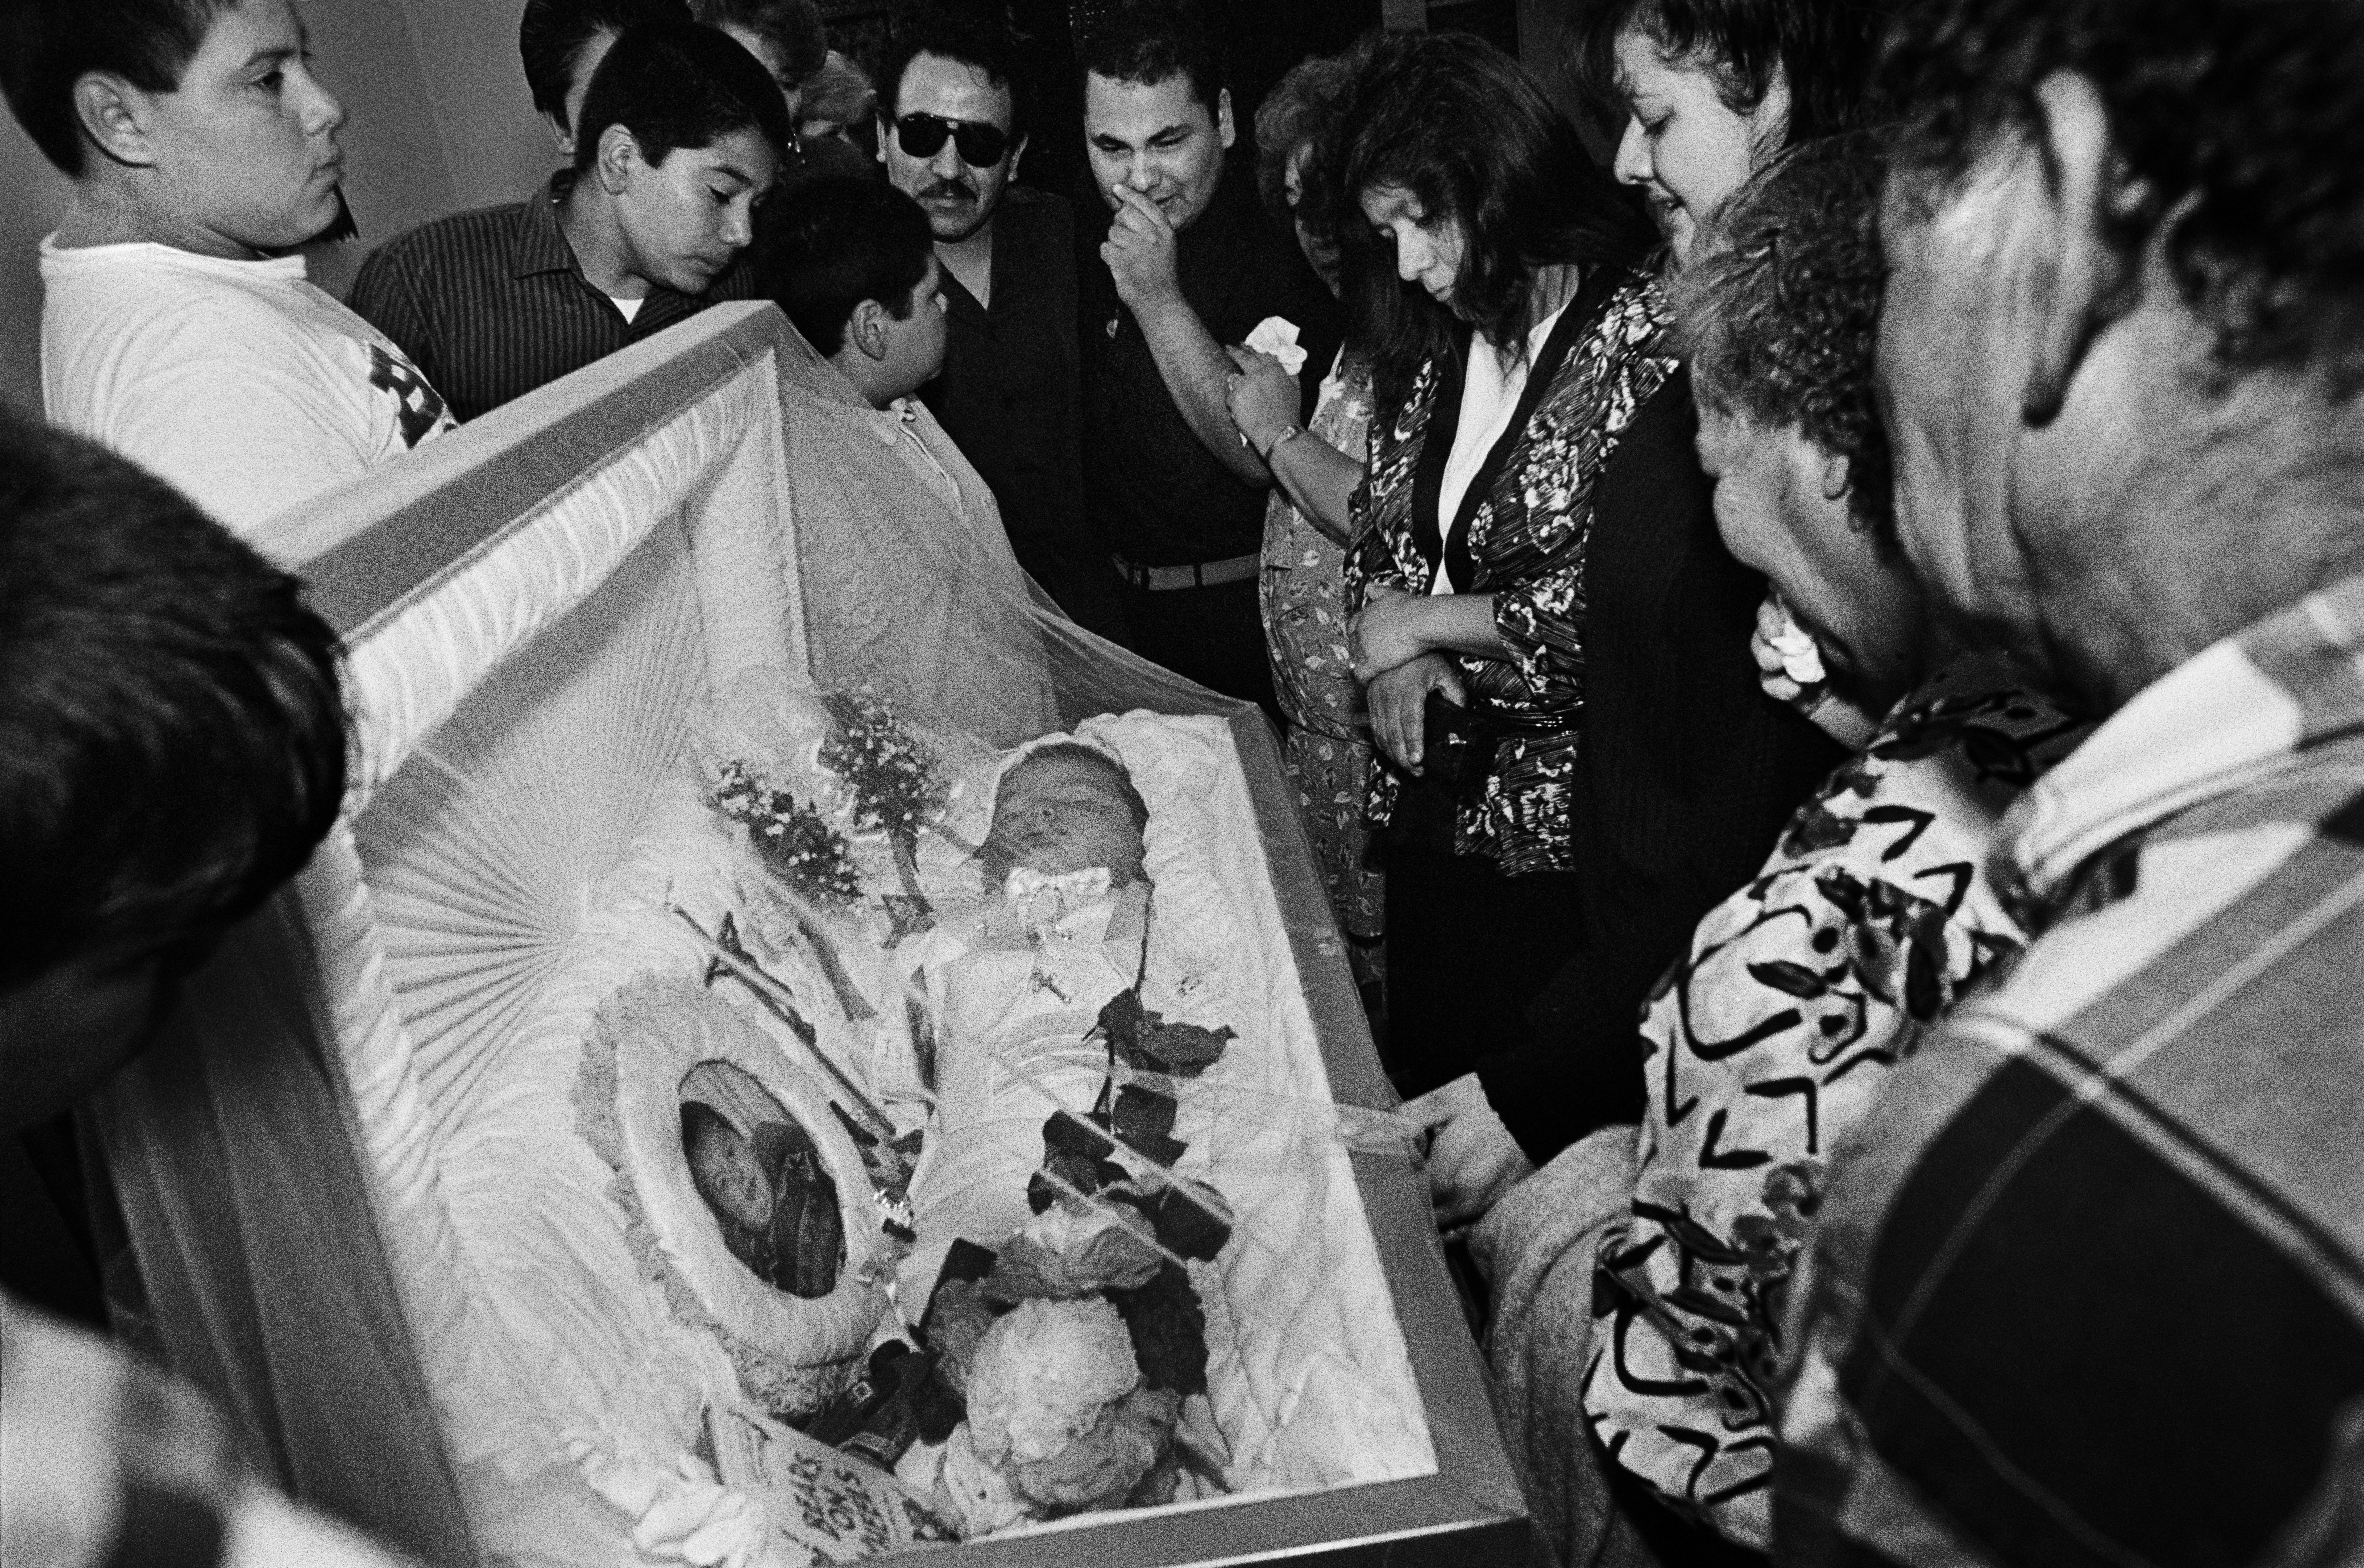 A family gathers the round of the coffin of Thomas Regalado III, who was killed by a stray bullet during a drive-by shooting. East Los Angeles, CA 1992